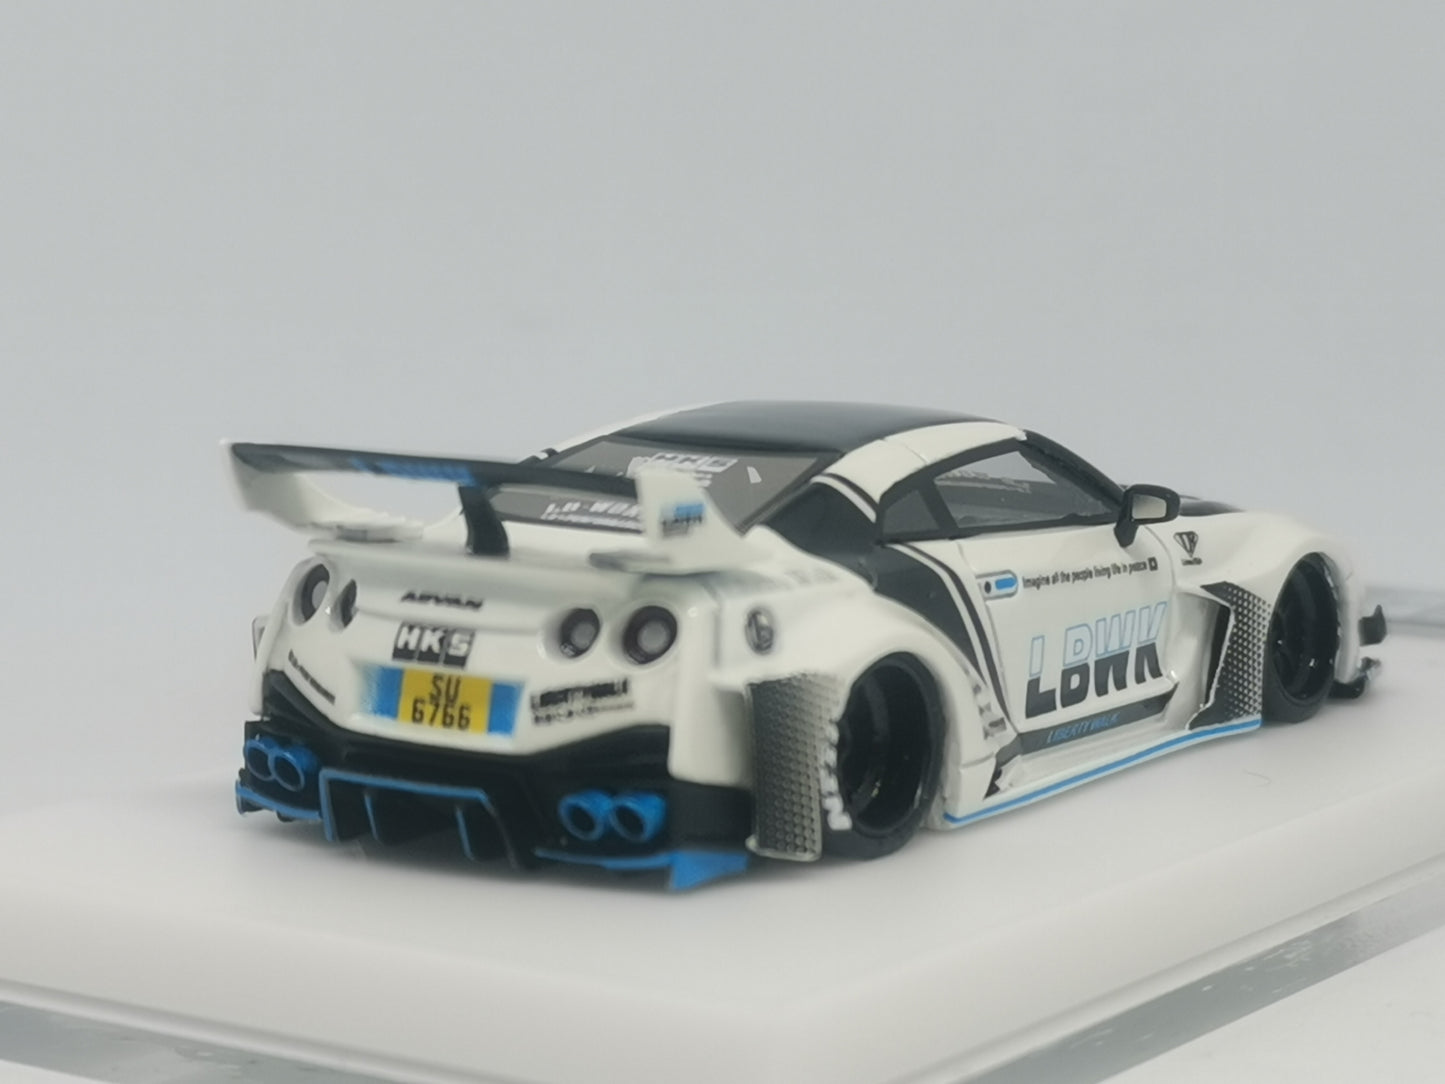 Veloce 1:64 Liberty Walk LB-Silhouette Works Nissan GT-R R35 35GT-RR (LBWK - Hong Kong Version White) (Resin Limited to 70 pcs)